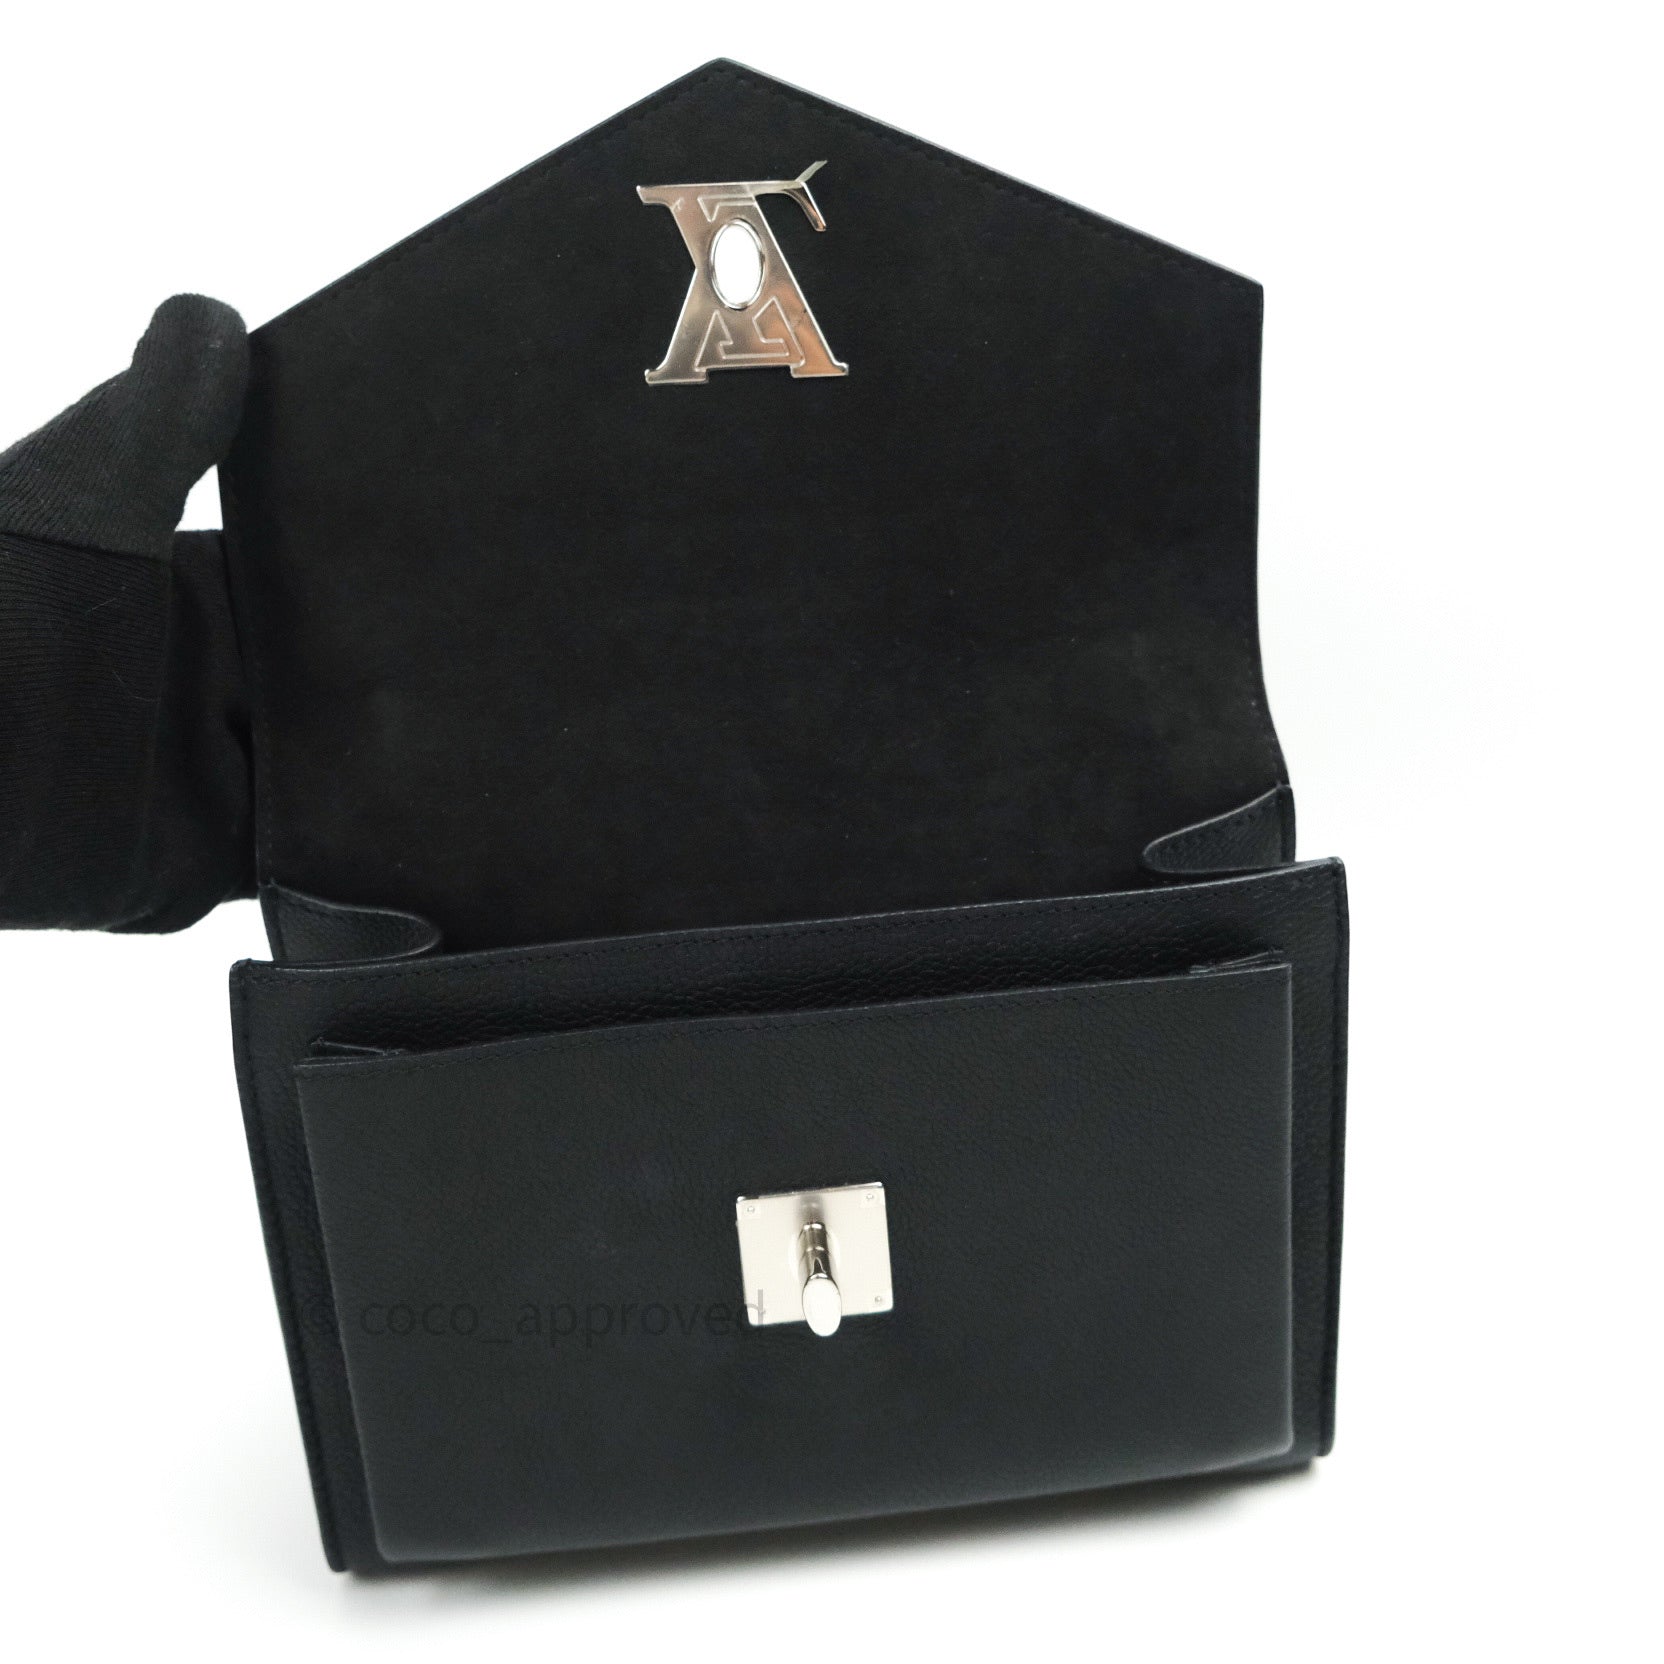 LOCÒ MICRO BAG IN CALFSKIN LEATHER WITH CHAIN